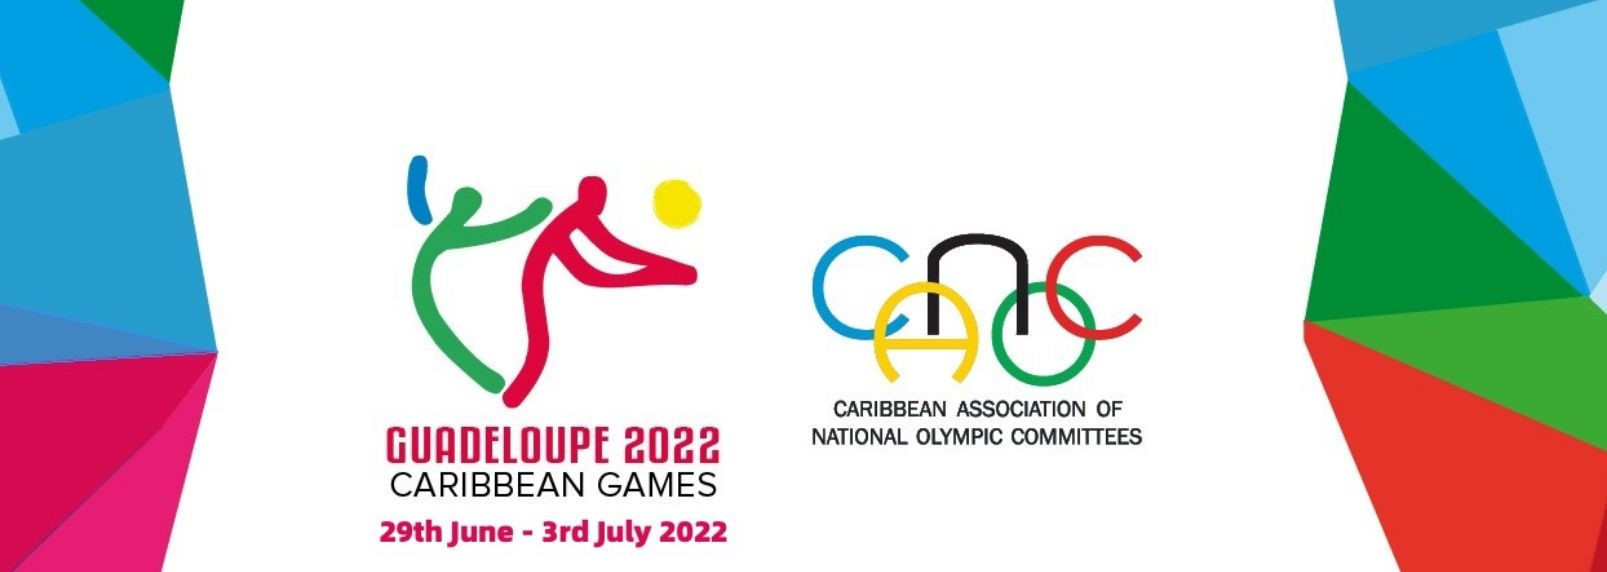 Guadeloupe is set to host the inaugural Caribbean Games ©CANOC